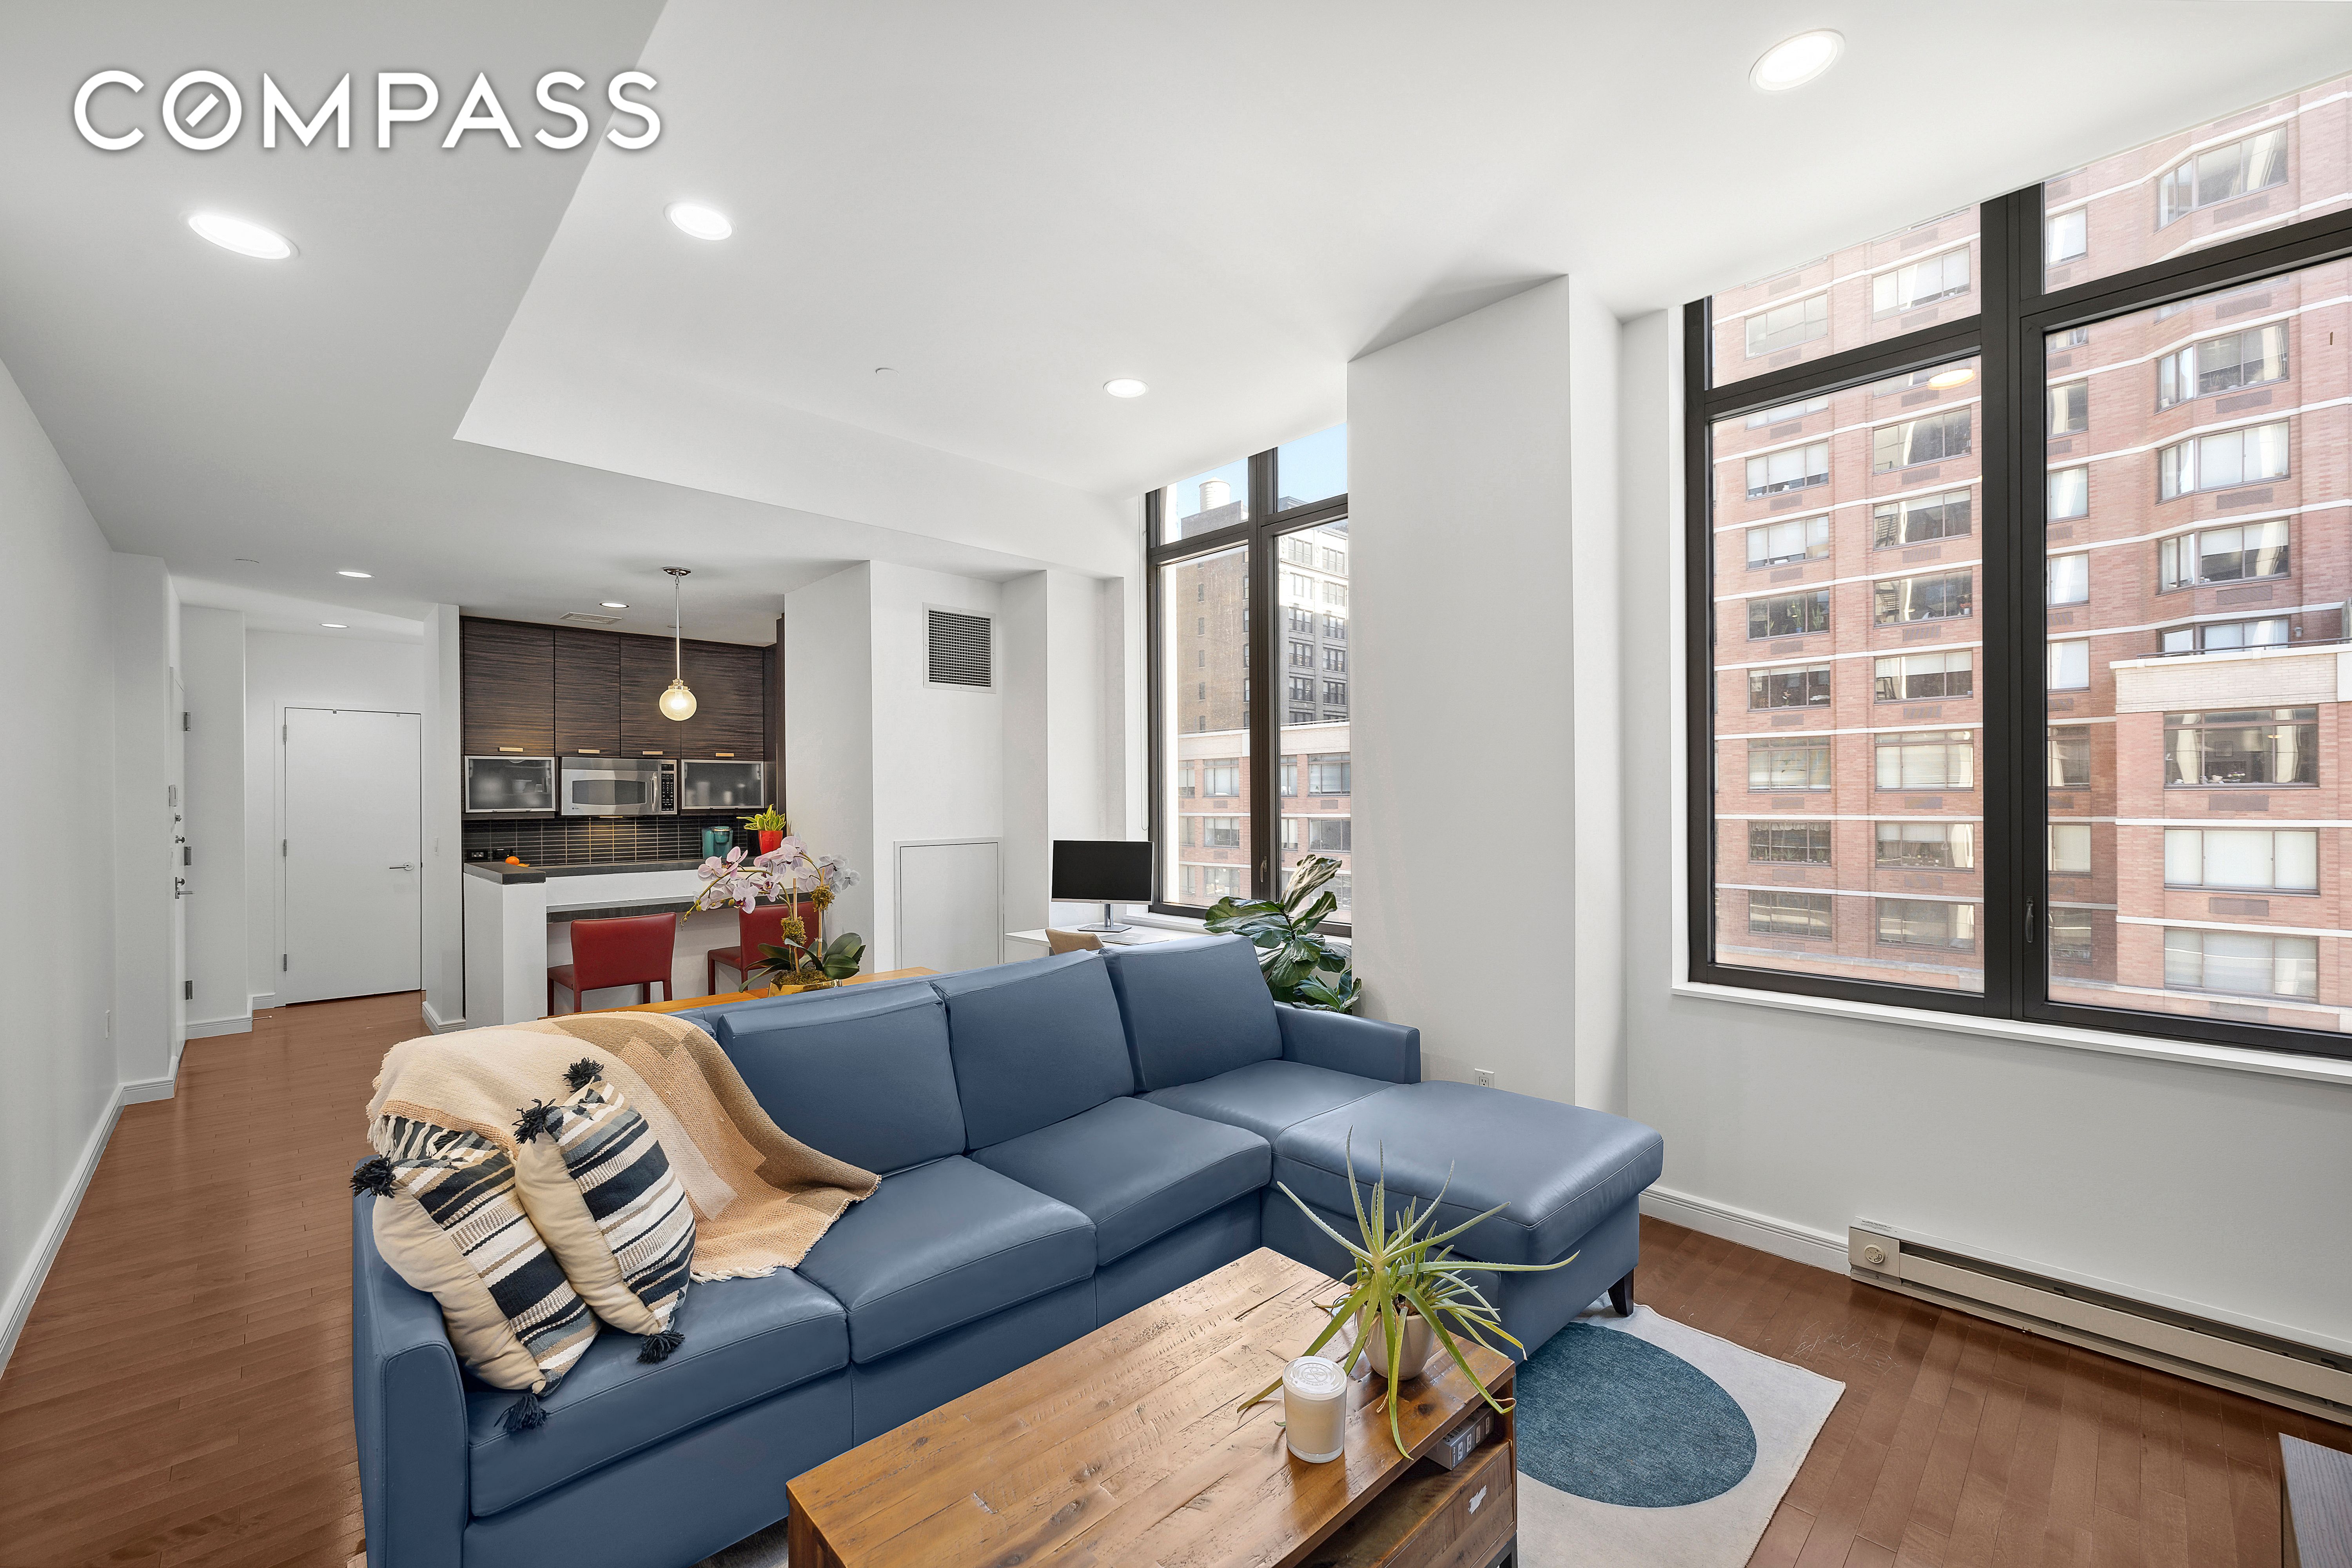 101 West 24th Street 5F, Chelsea, Downtown, NYC - 1 Bedrooms  
1 Bathrooms  
3 Rooms - 